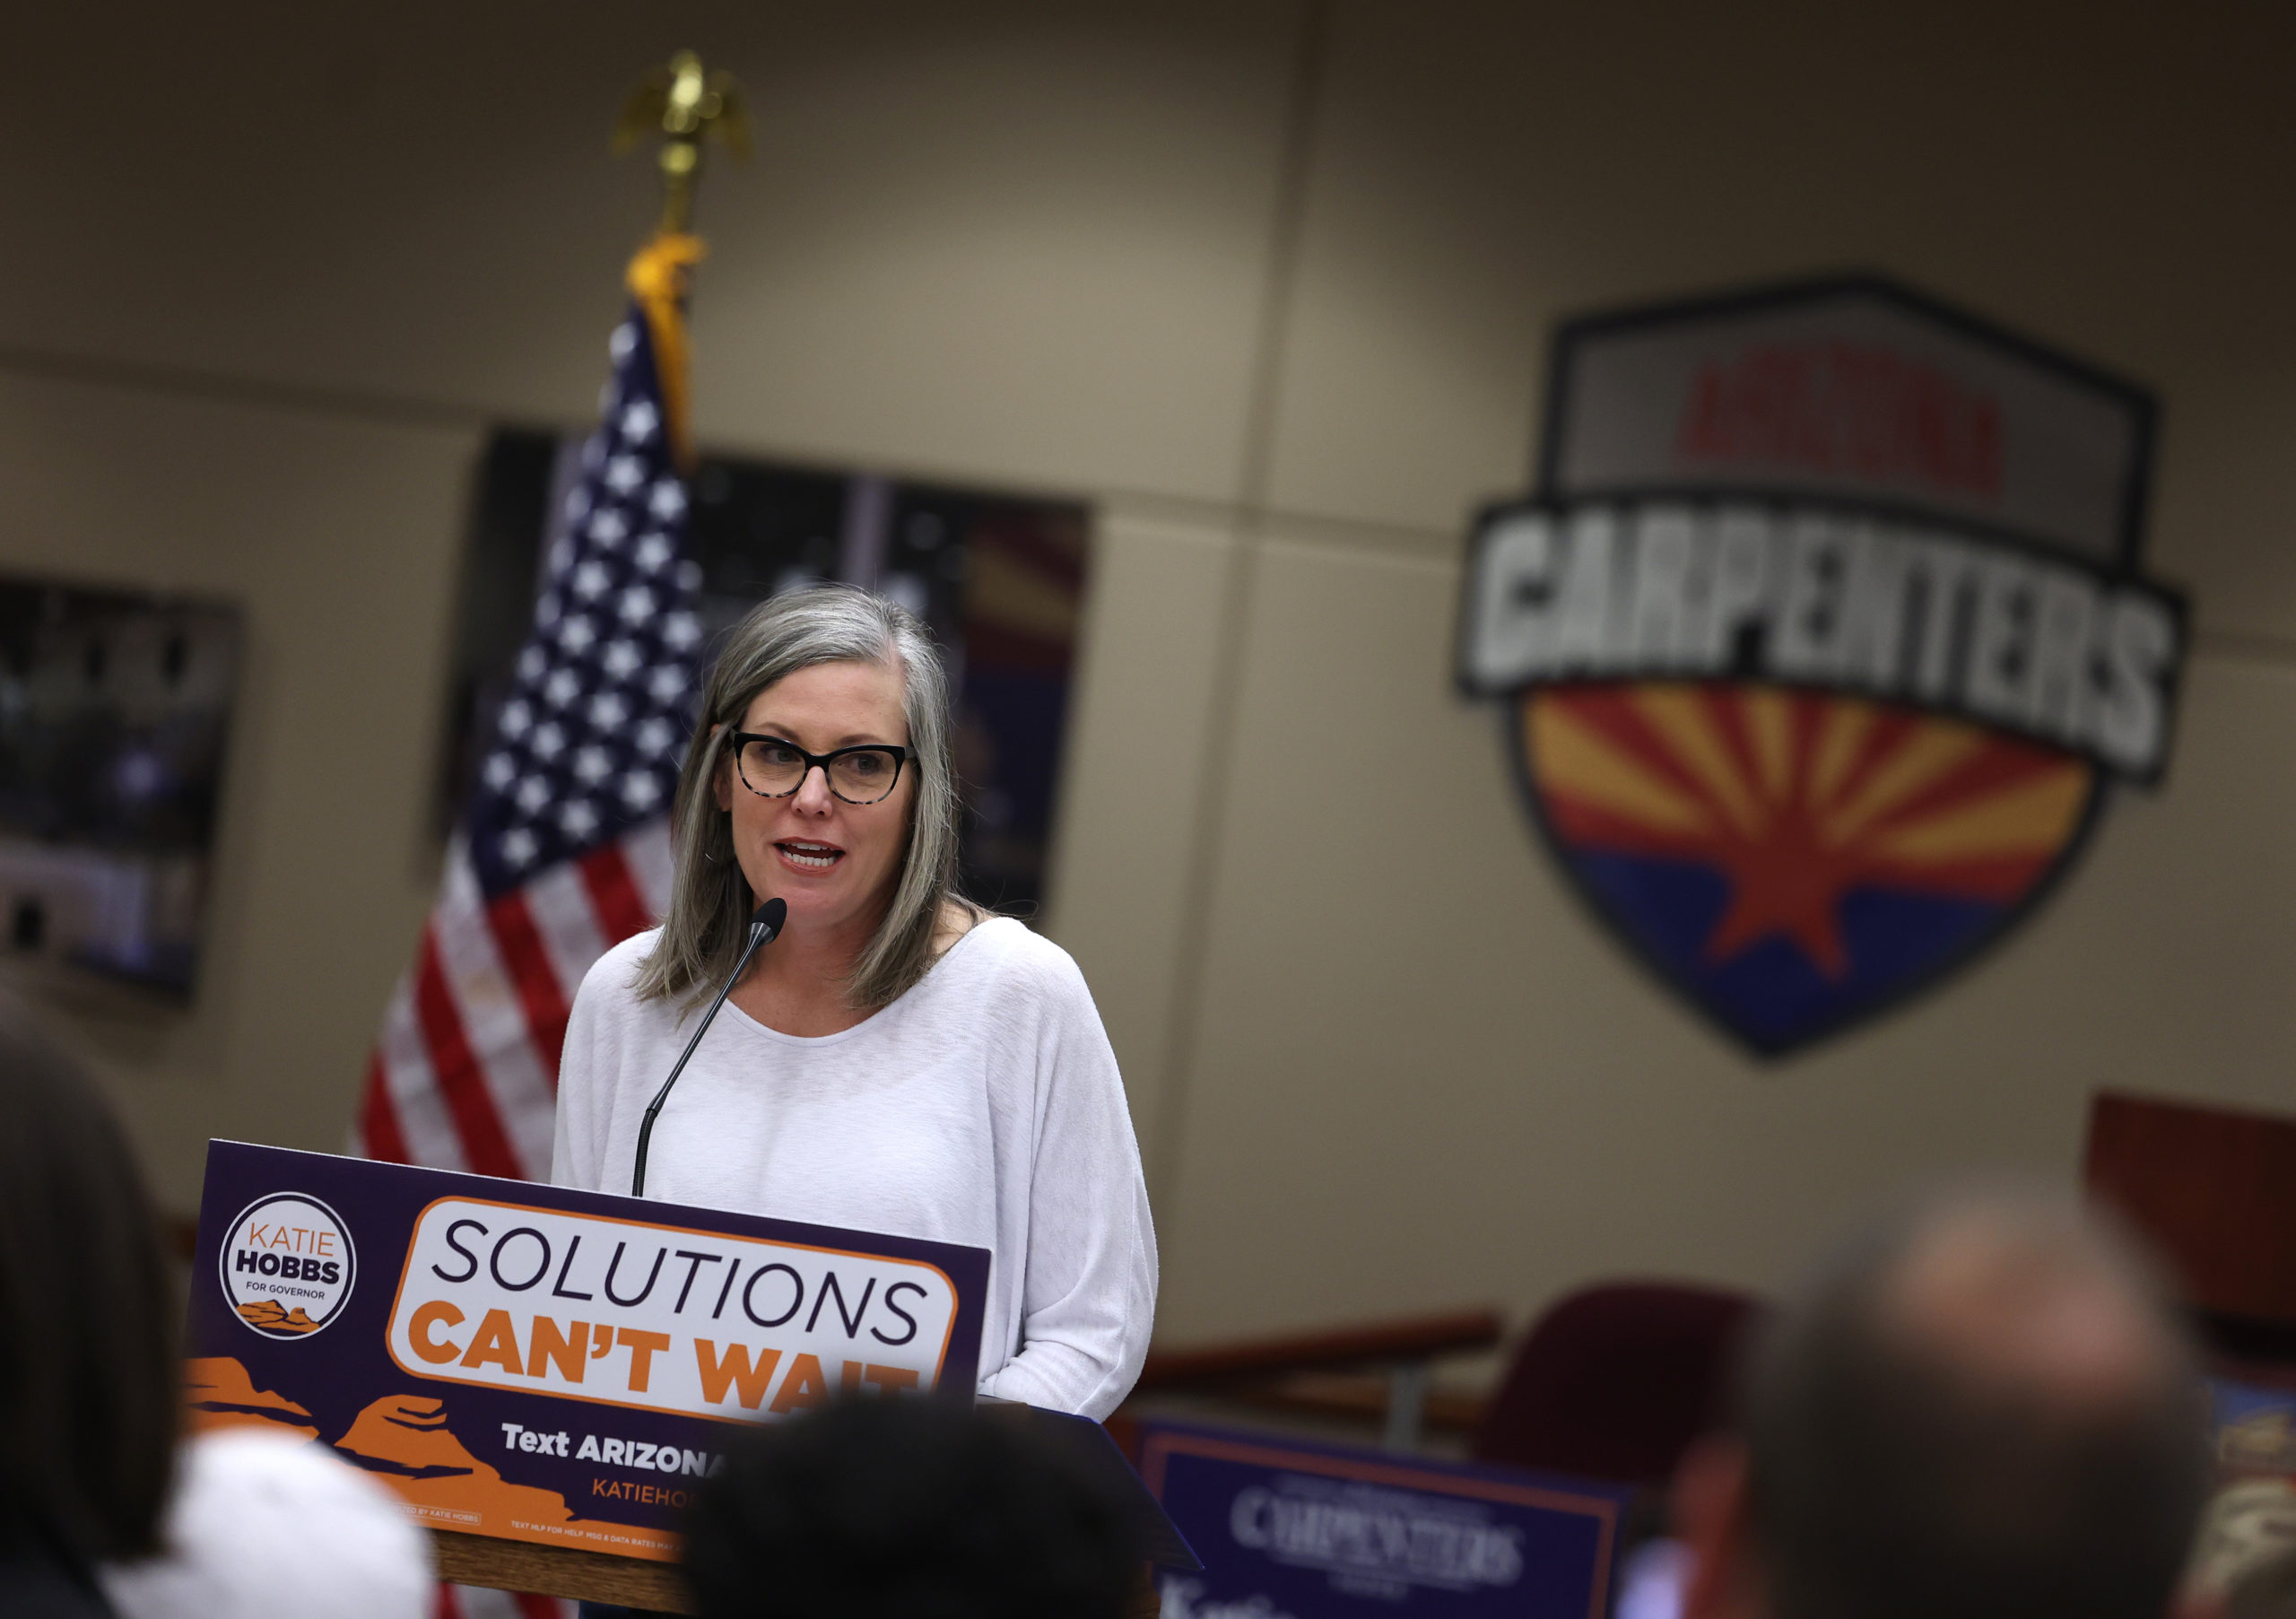 PHOENIX, ARIZONA - NOVEMBER 05: Arizona Democratic gubernatorial candidate Katie Hobbs speaks at a campaign event at the Carpenters Local Union 1912 headquarters on November 05, 2022 in Phoenix, Arizona. With three days to go before election day, Arizona democratic gubernatorial candidate Katie Hobbs continues to campaign across the state as she faces a tight race against Trump endorsed republican candidate Kari Lake. (Photo by Kevin Dietsch/Getty Images)